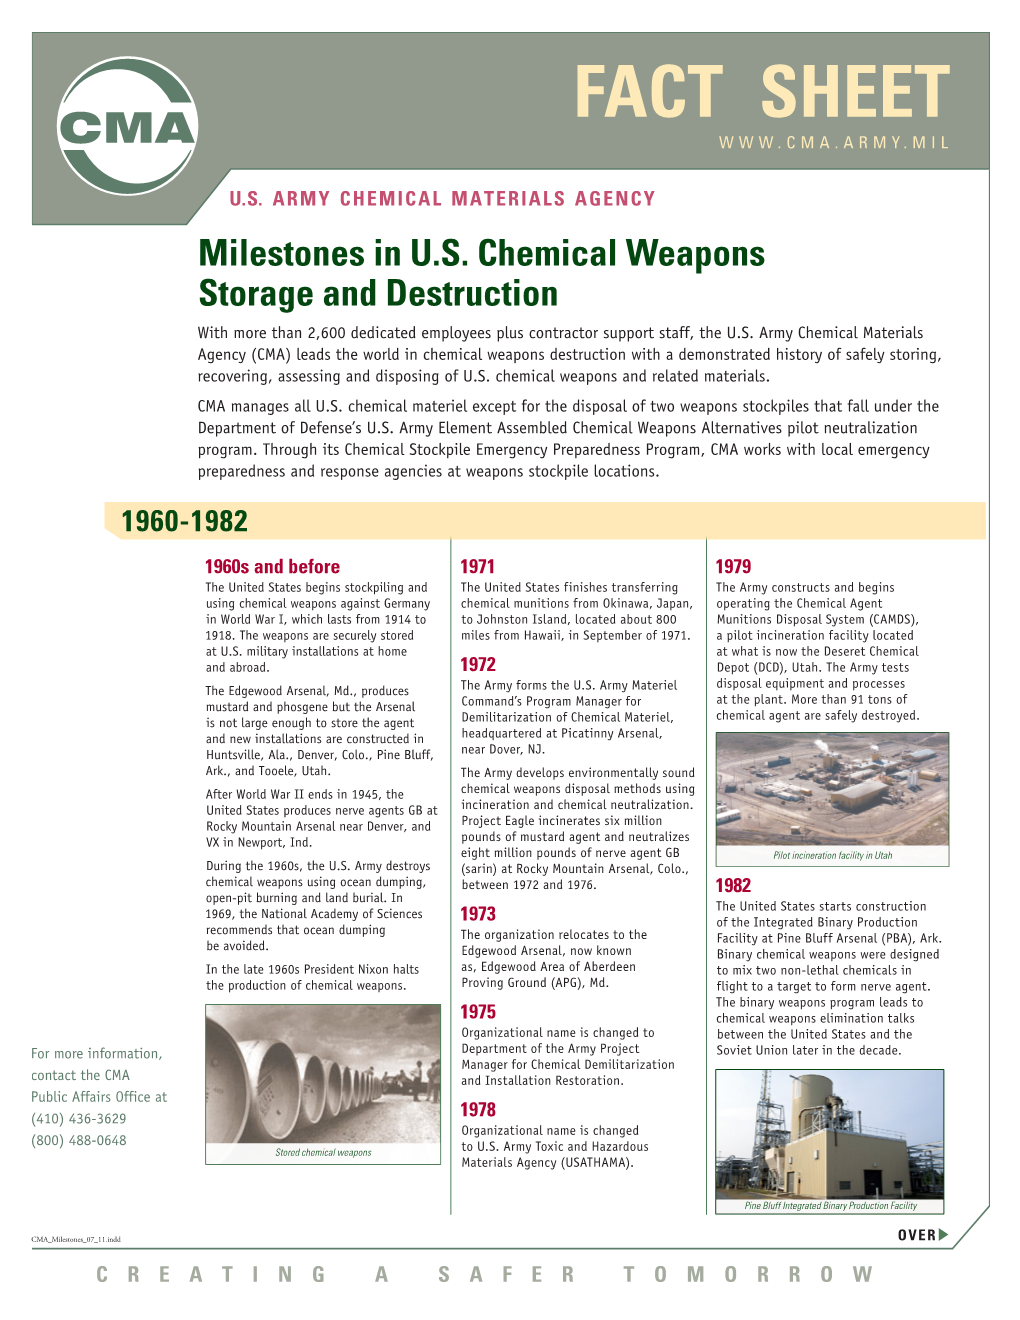 Milestones in U.S. Chemical Weapons Storage and Destruction with More Than 2,600 Dedicated Employees Plus Contractor Support Staff, the U.S